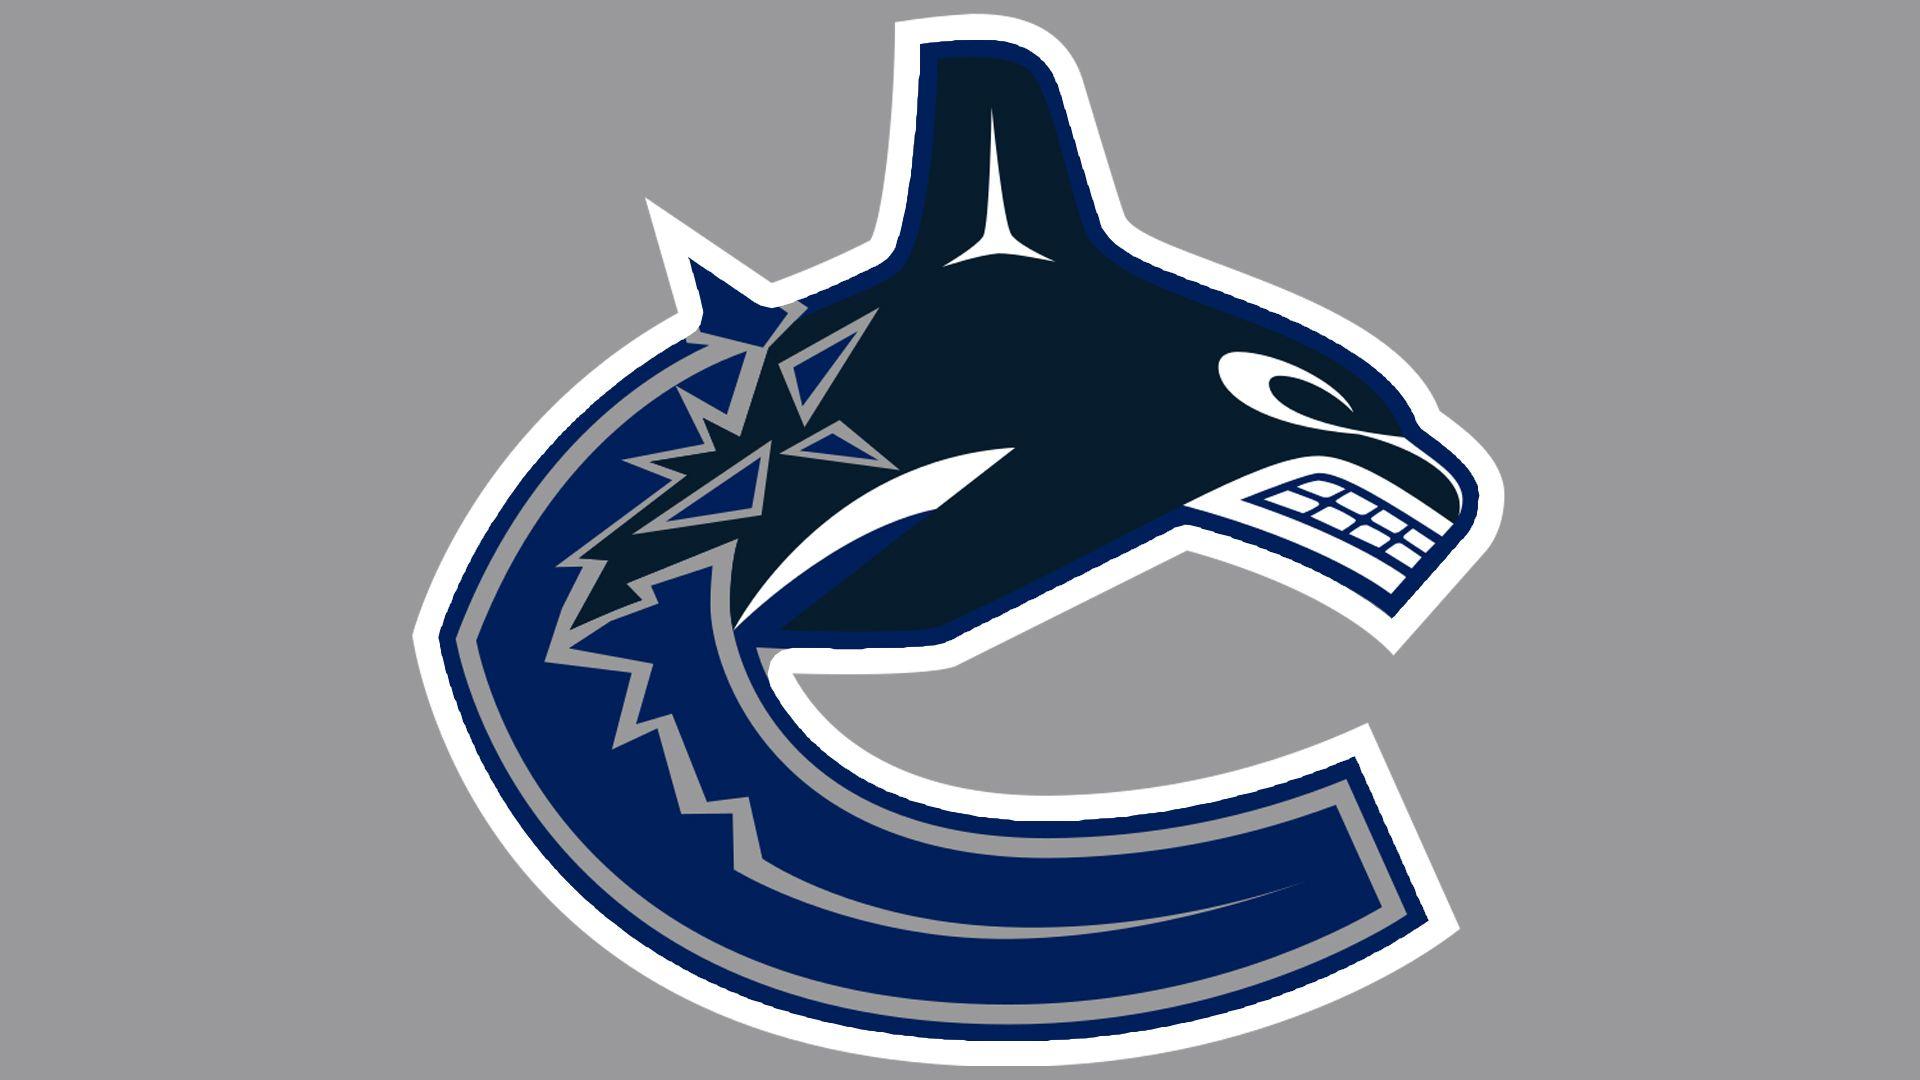 Canucks Logo - Vancouver Canucks Logo, Vancouver Canucks Symbol, Meaning, History ...